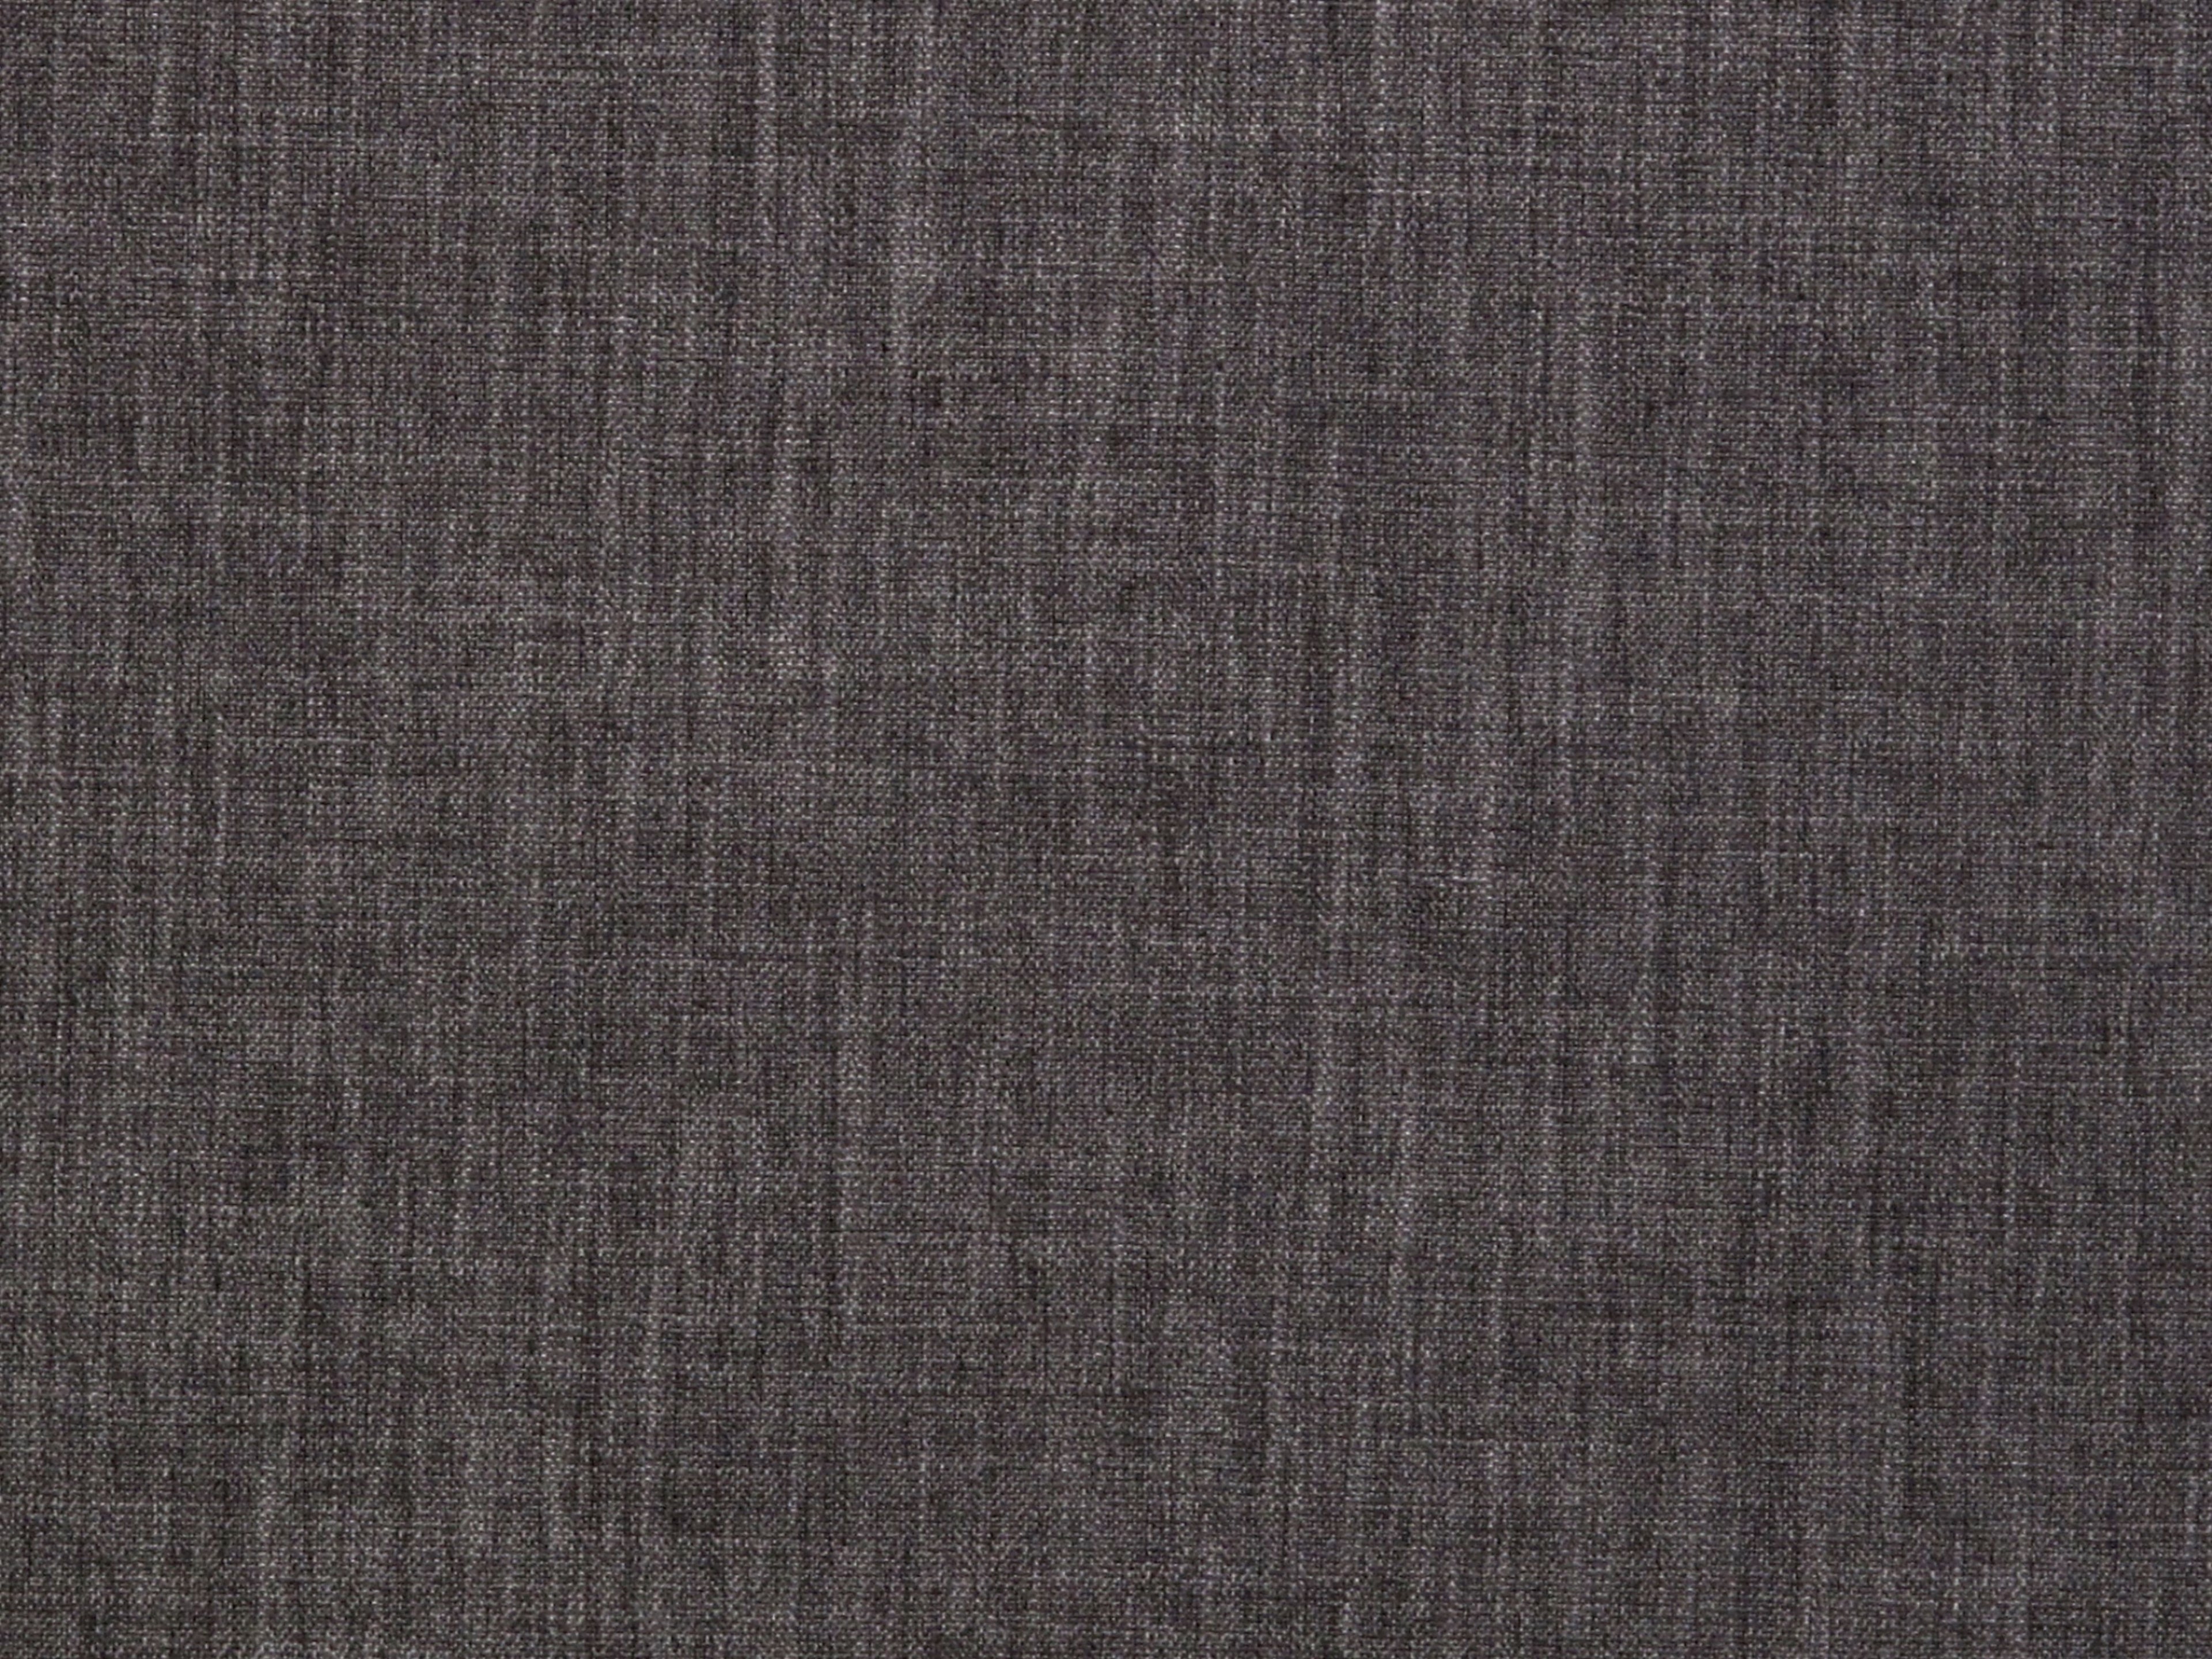 Flax fabric in ash color - pattern number H6 0014FLAX - by Scalamandre in the Old World Weavers collection